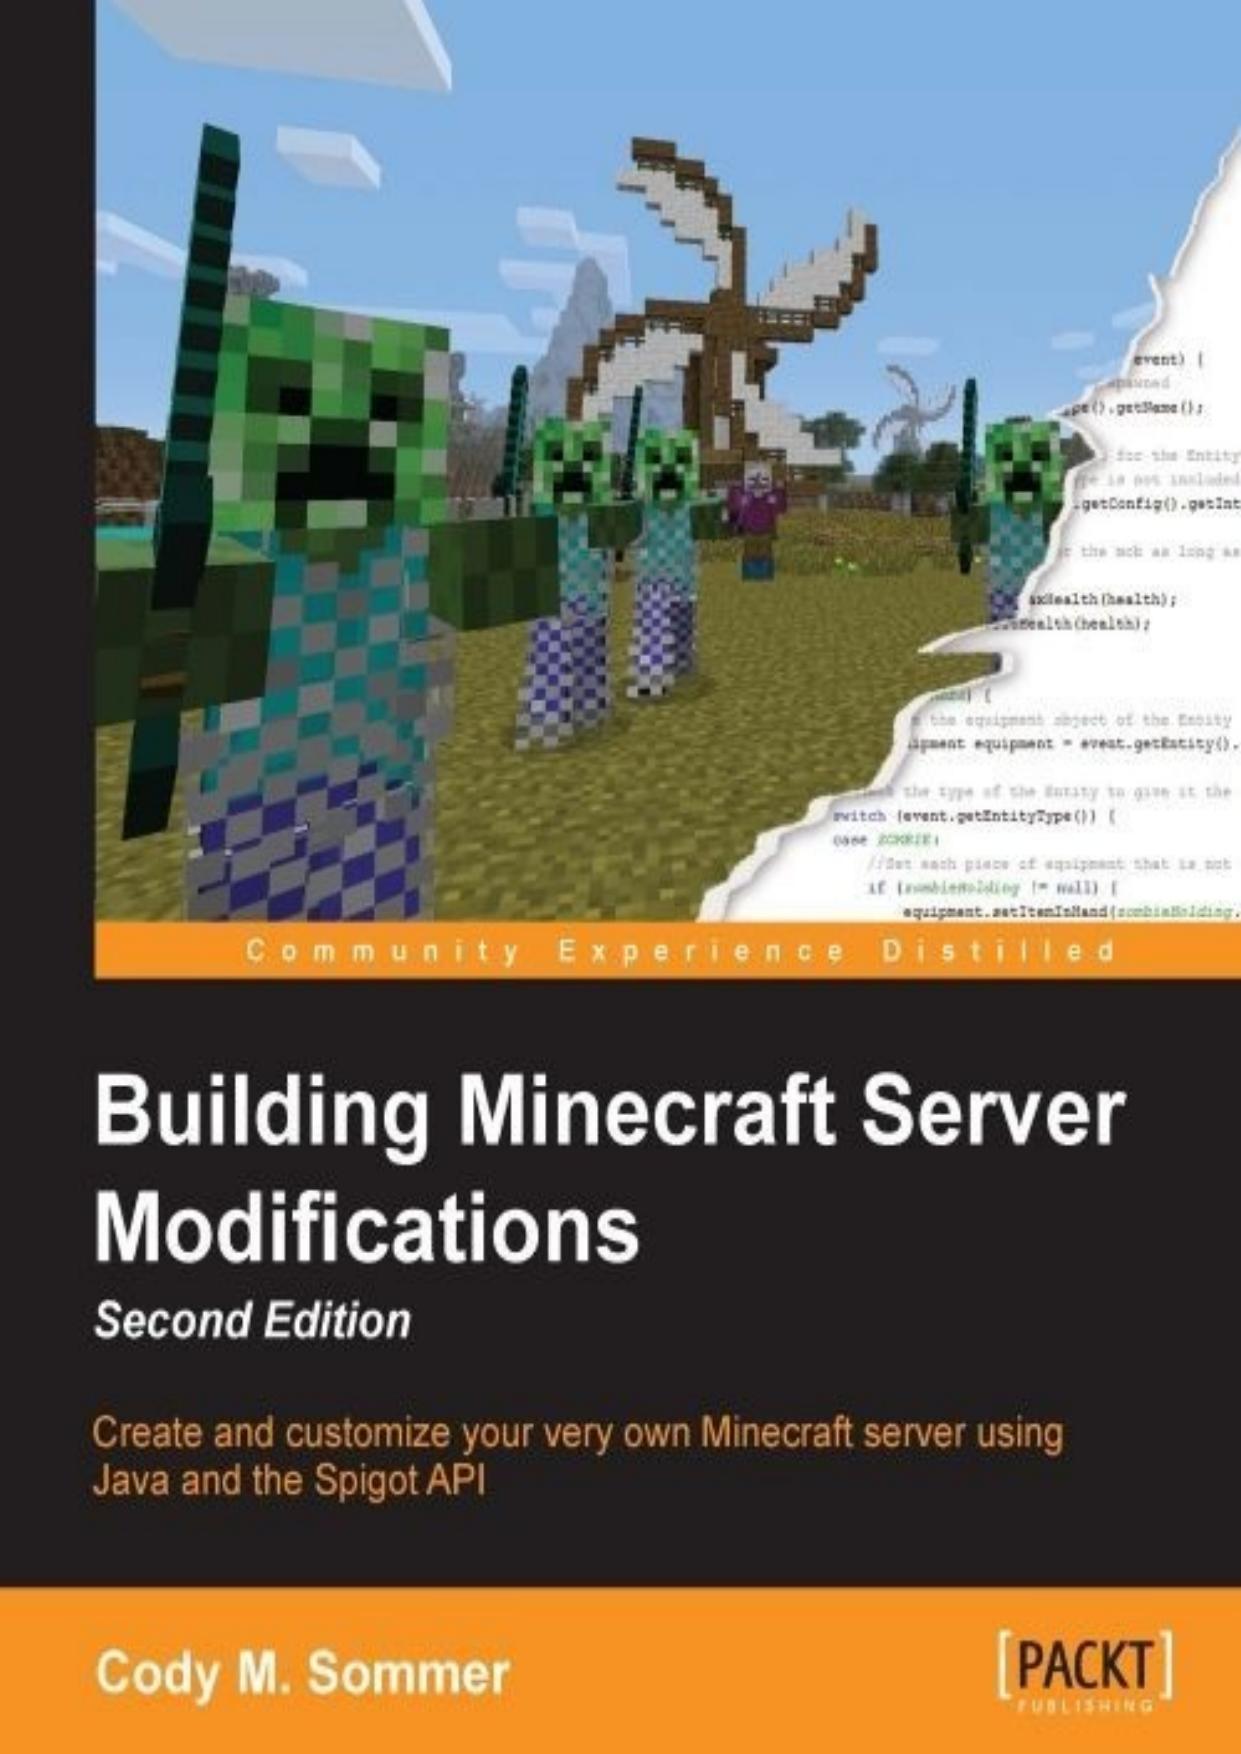 Building Minecraft Server Modifications - Second Edition by Cody M. Sommer